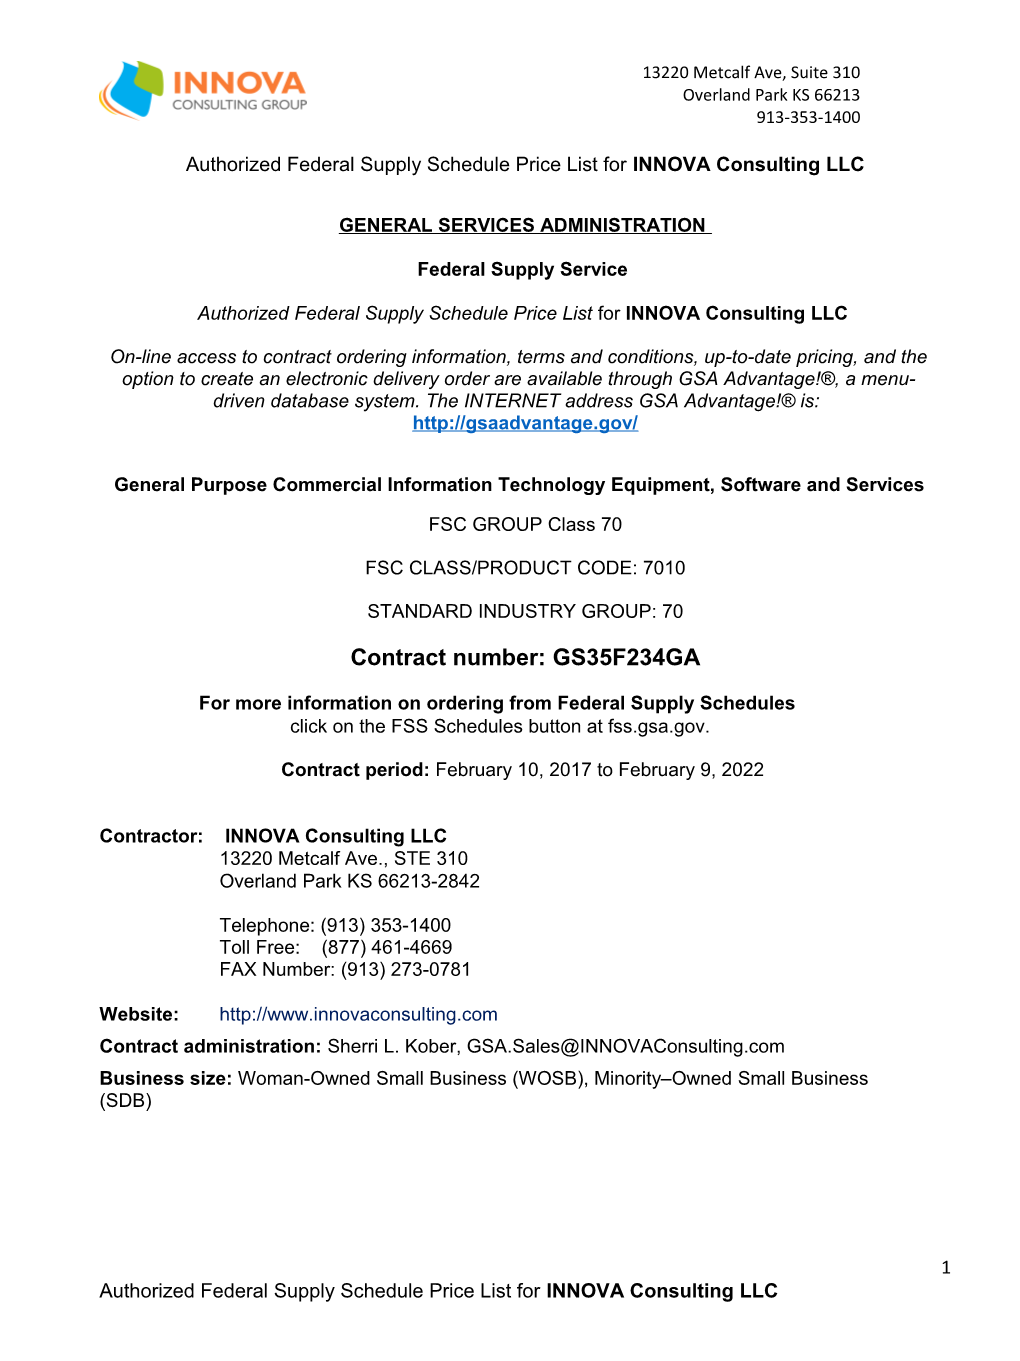 Authorized Federal Supply Schedule Price List for INNOVA Consulting LLC